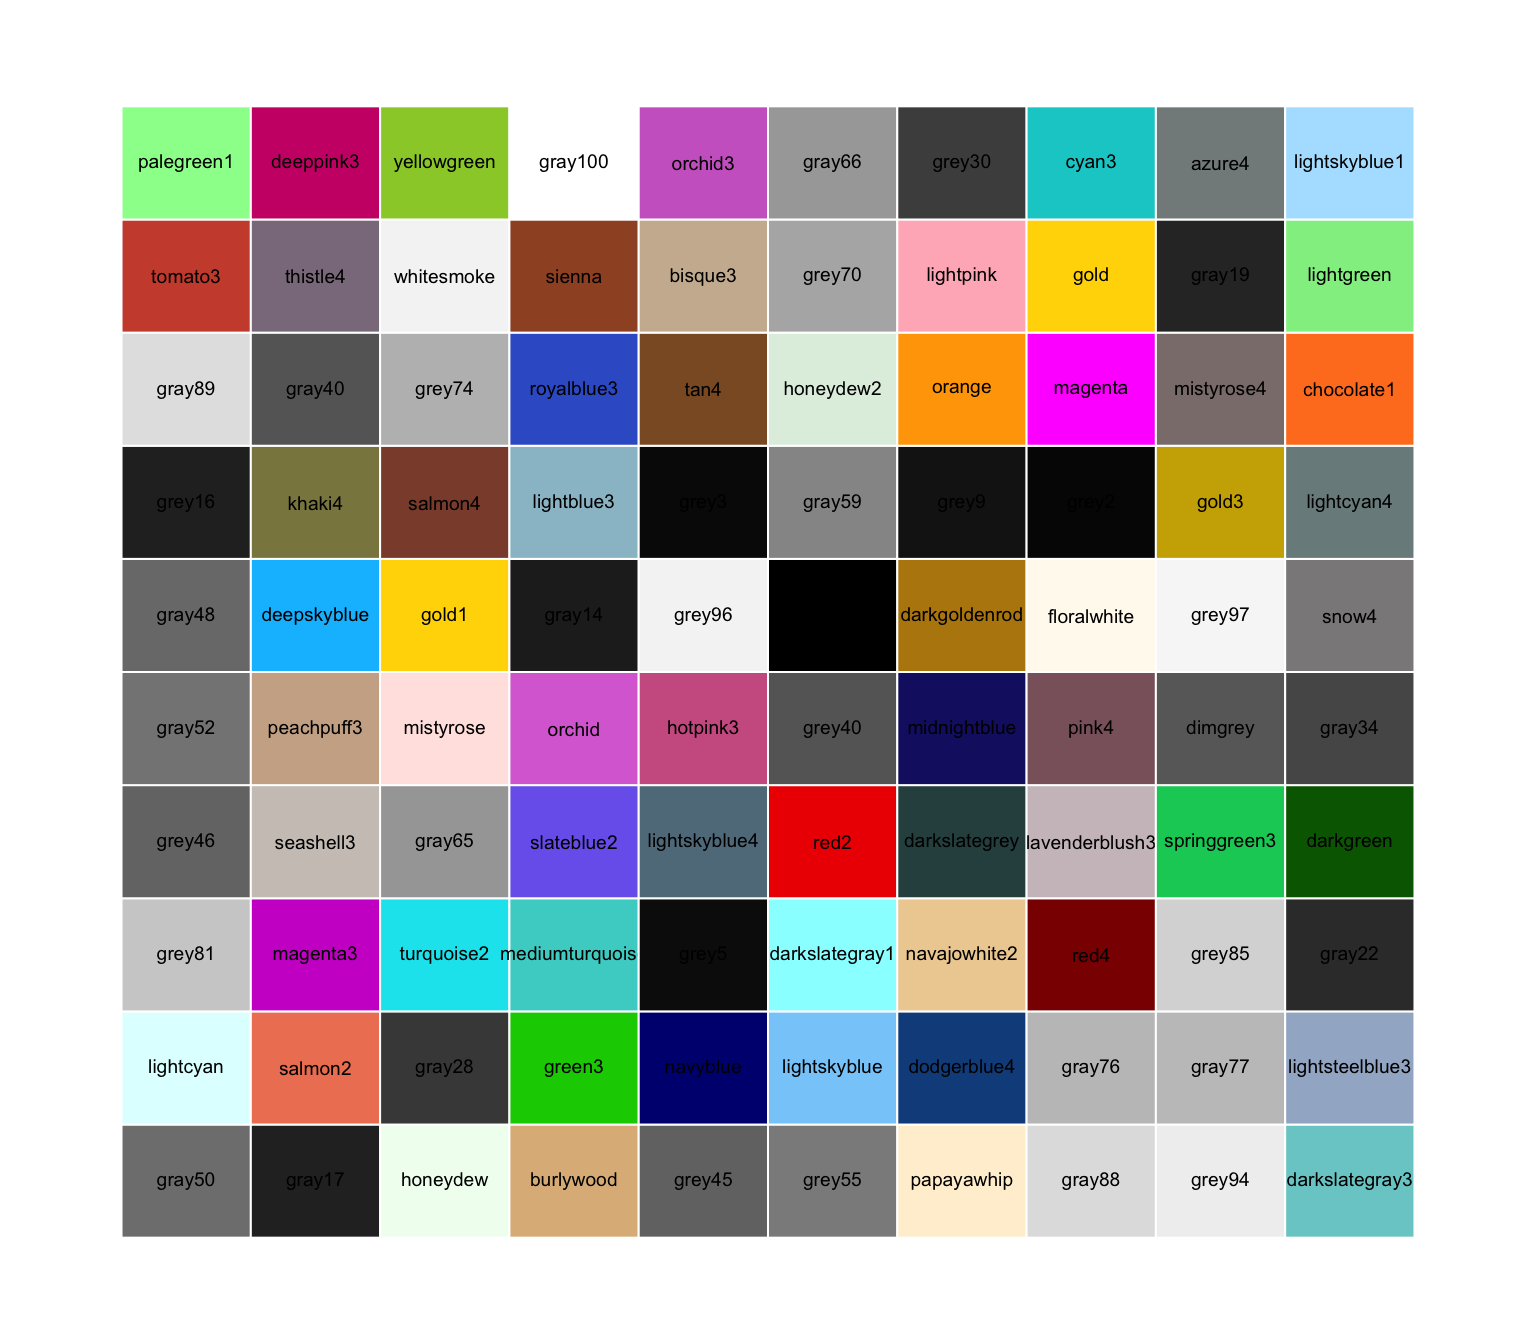 100 random named colors (out of all 657) in R.